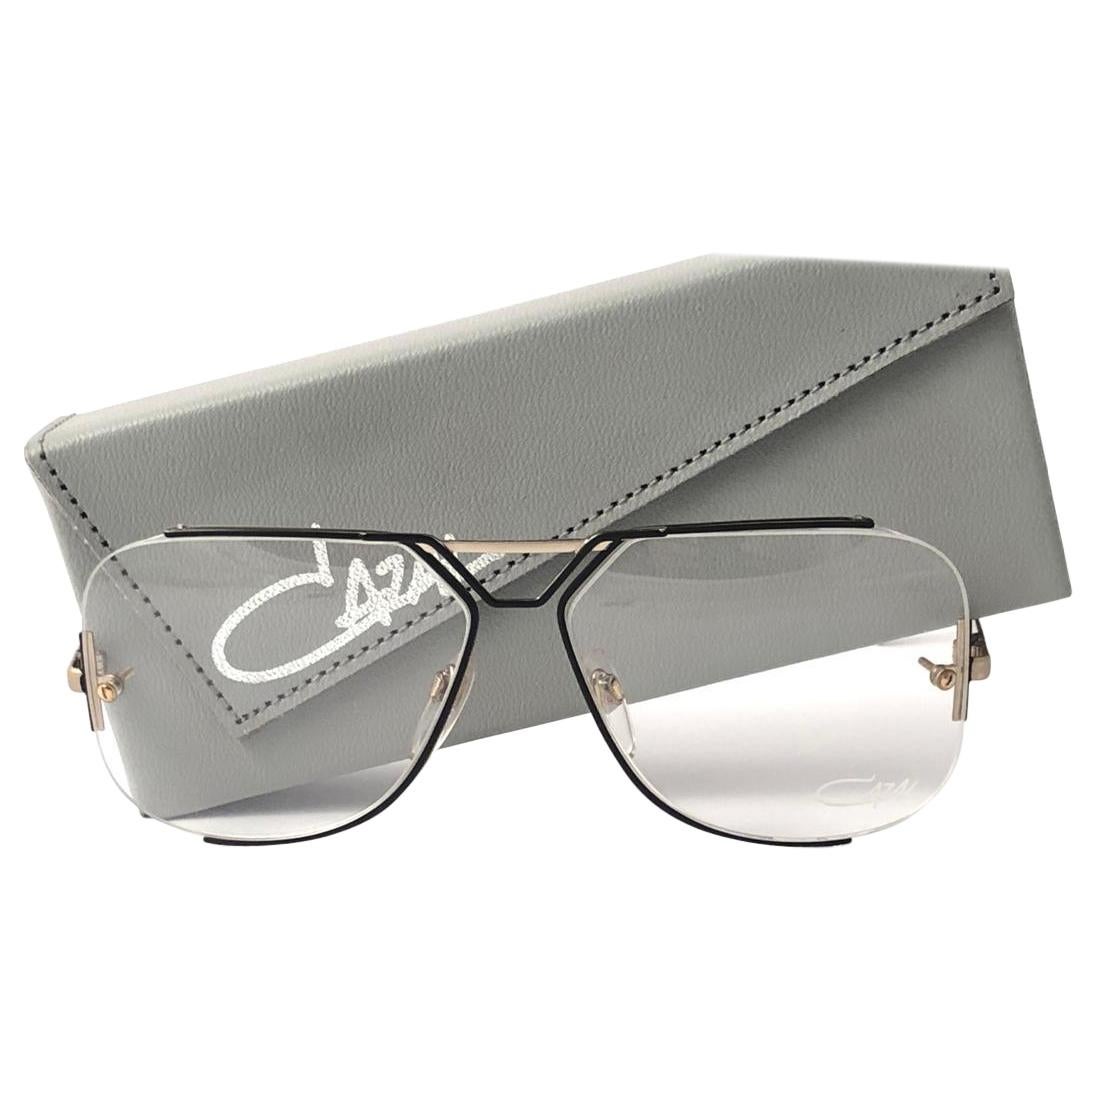 mother of pearl sunglasses chanel women